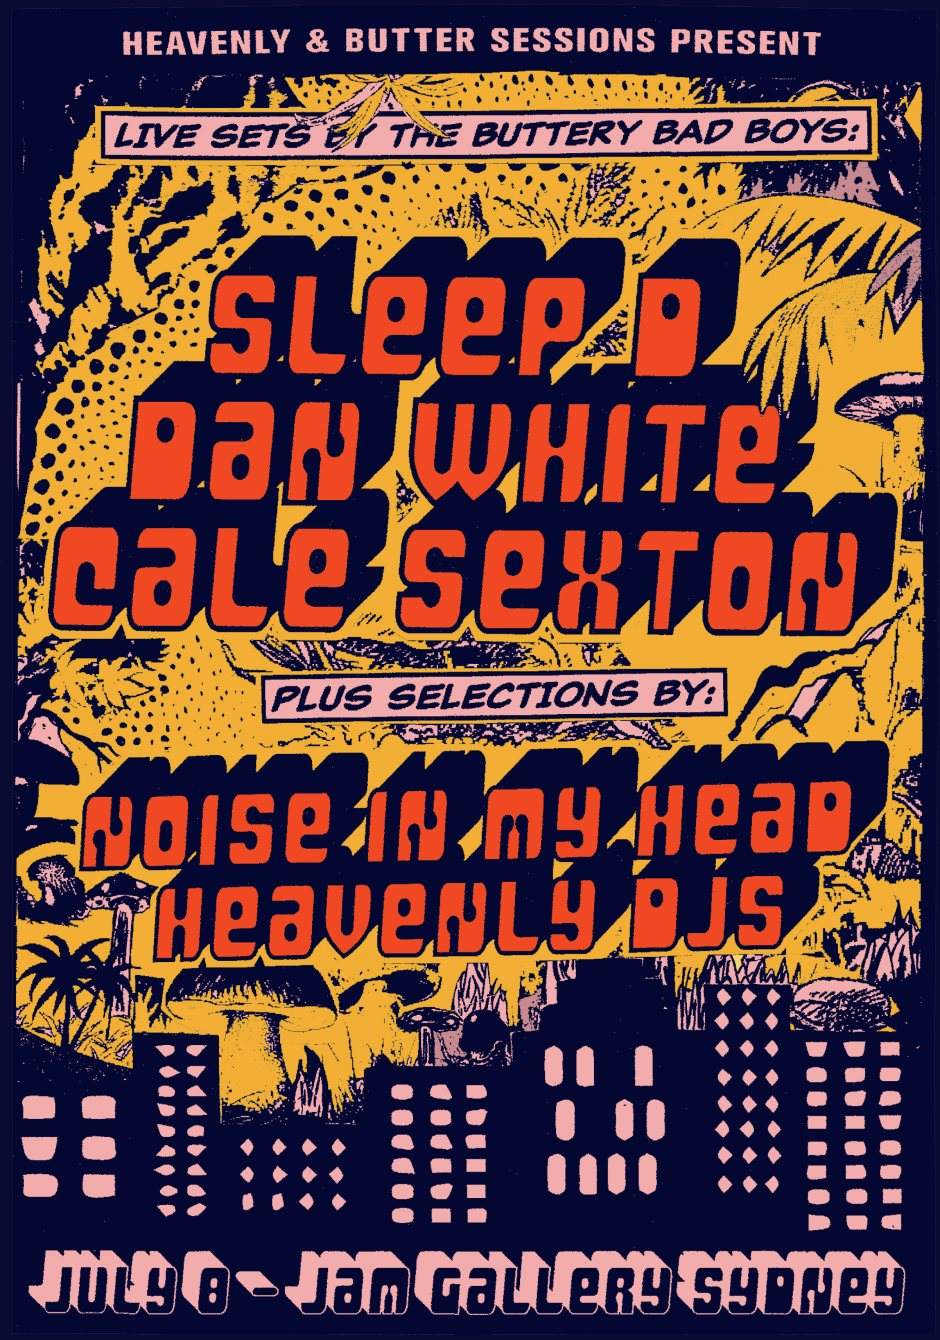 Heavenly & Butter Sessions present Sleep D, Dan White, Cale Sexton - Página frontal